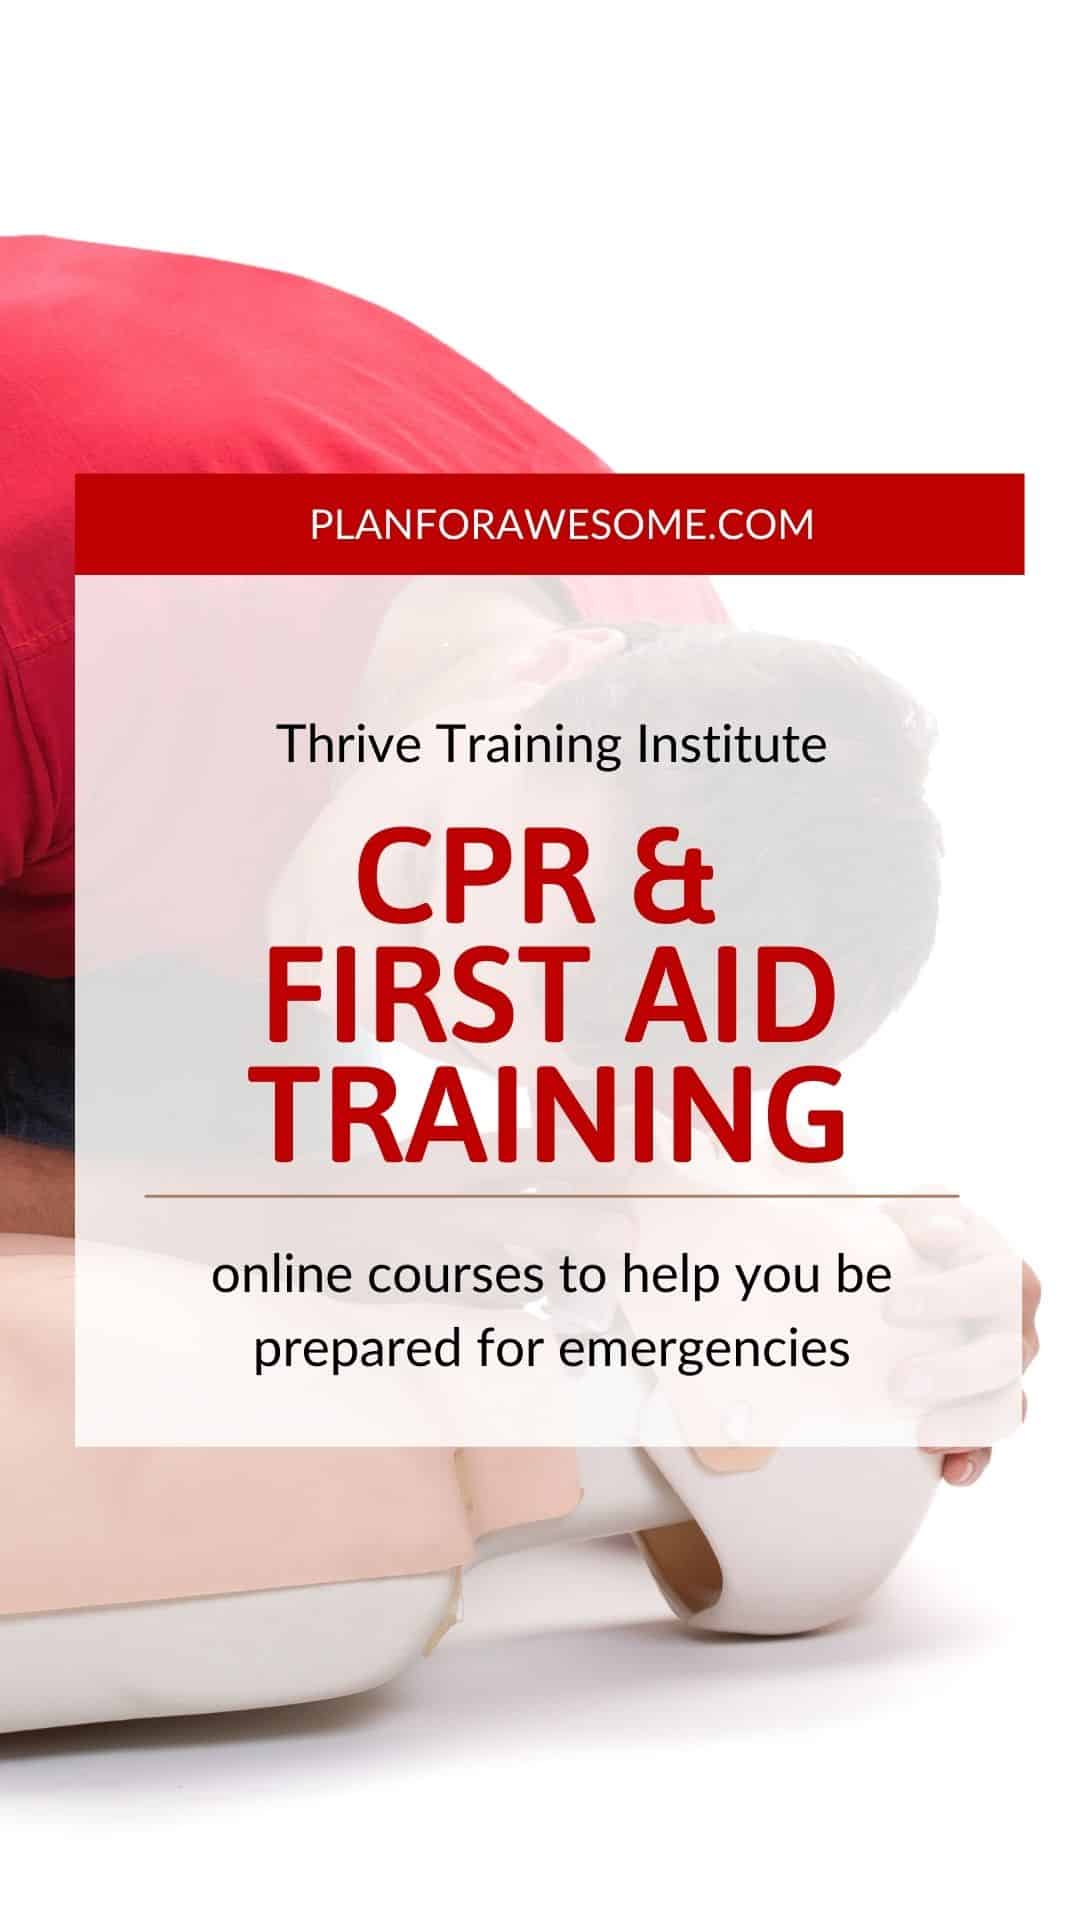 Why I love this legit online CPR Course